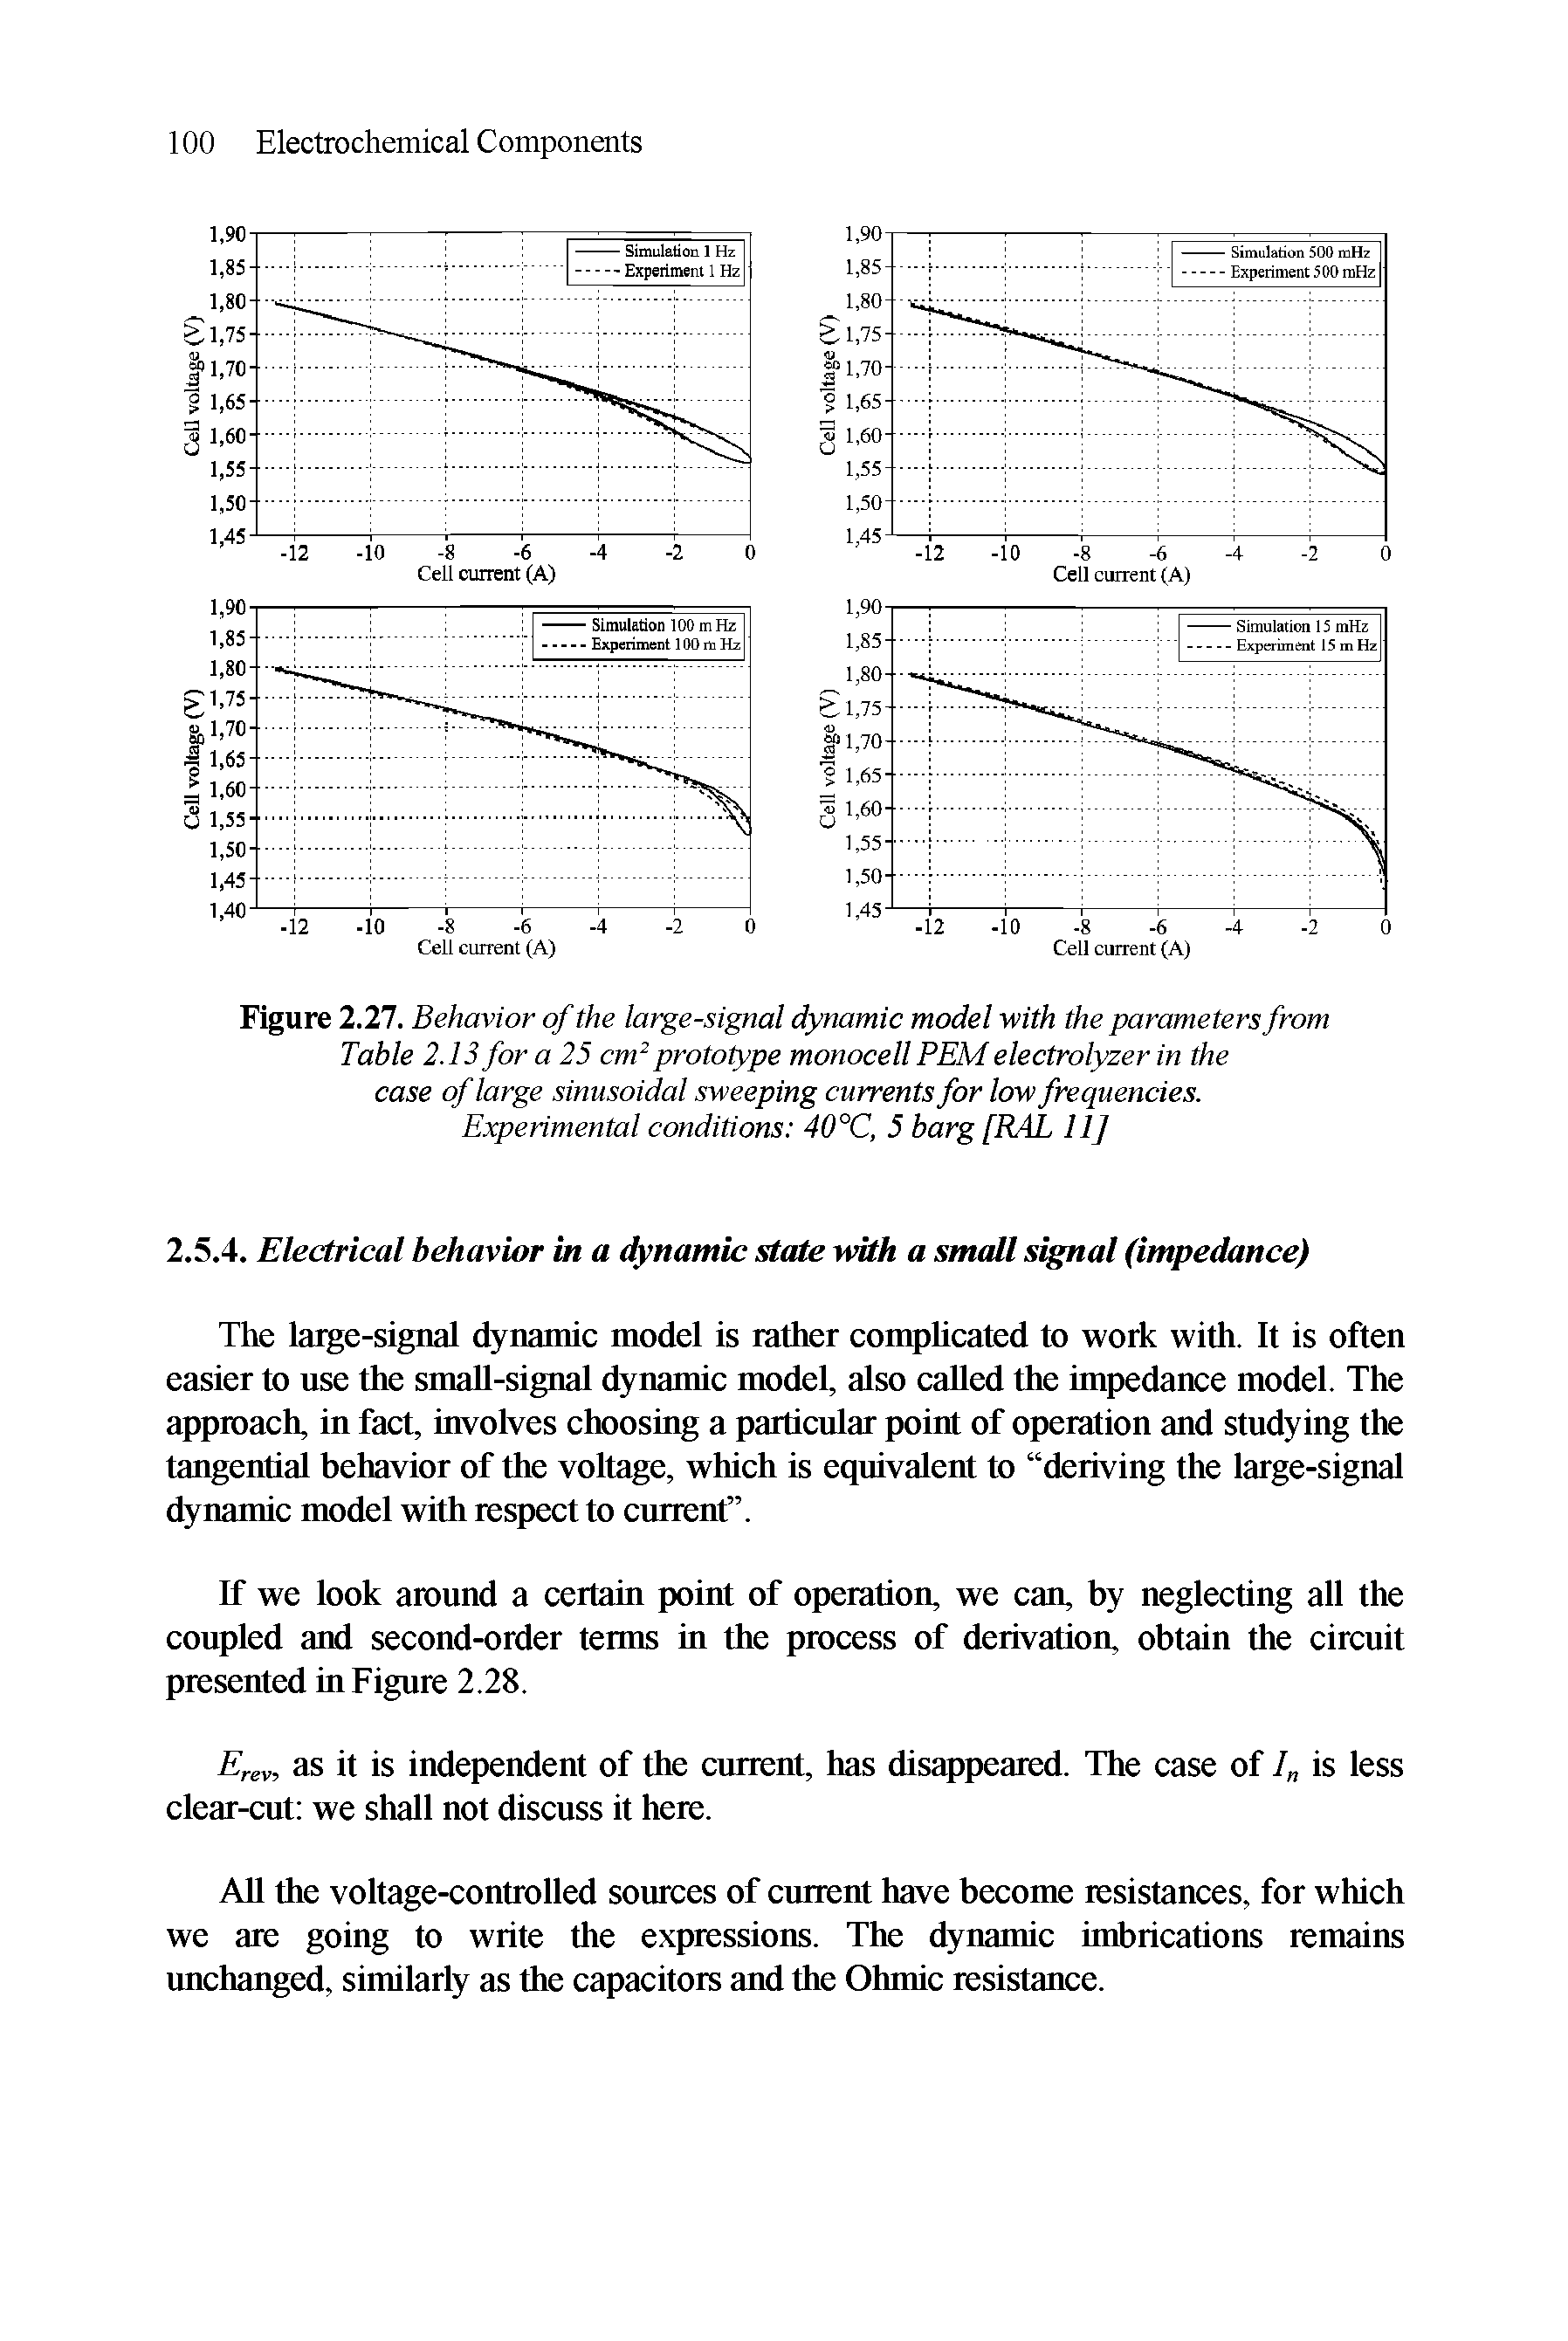 Figure 2.27. Behavior of the large-signal dynamic model with the parameters from Table 2.13 for a 25 cm prototype monocell PEM electrolyzer in the case of large sinusoidal sweeping currents for low frequencies.